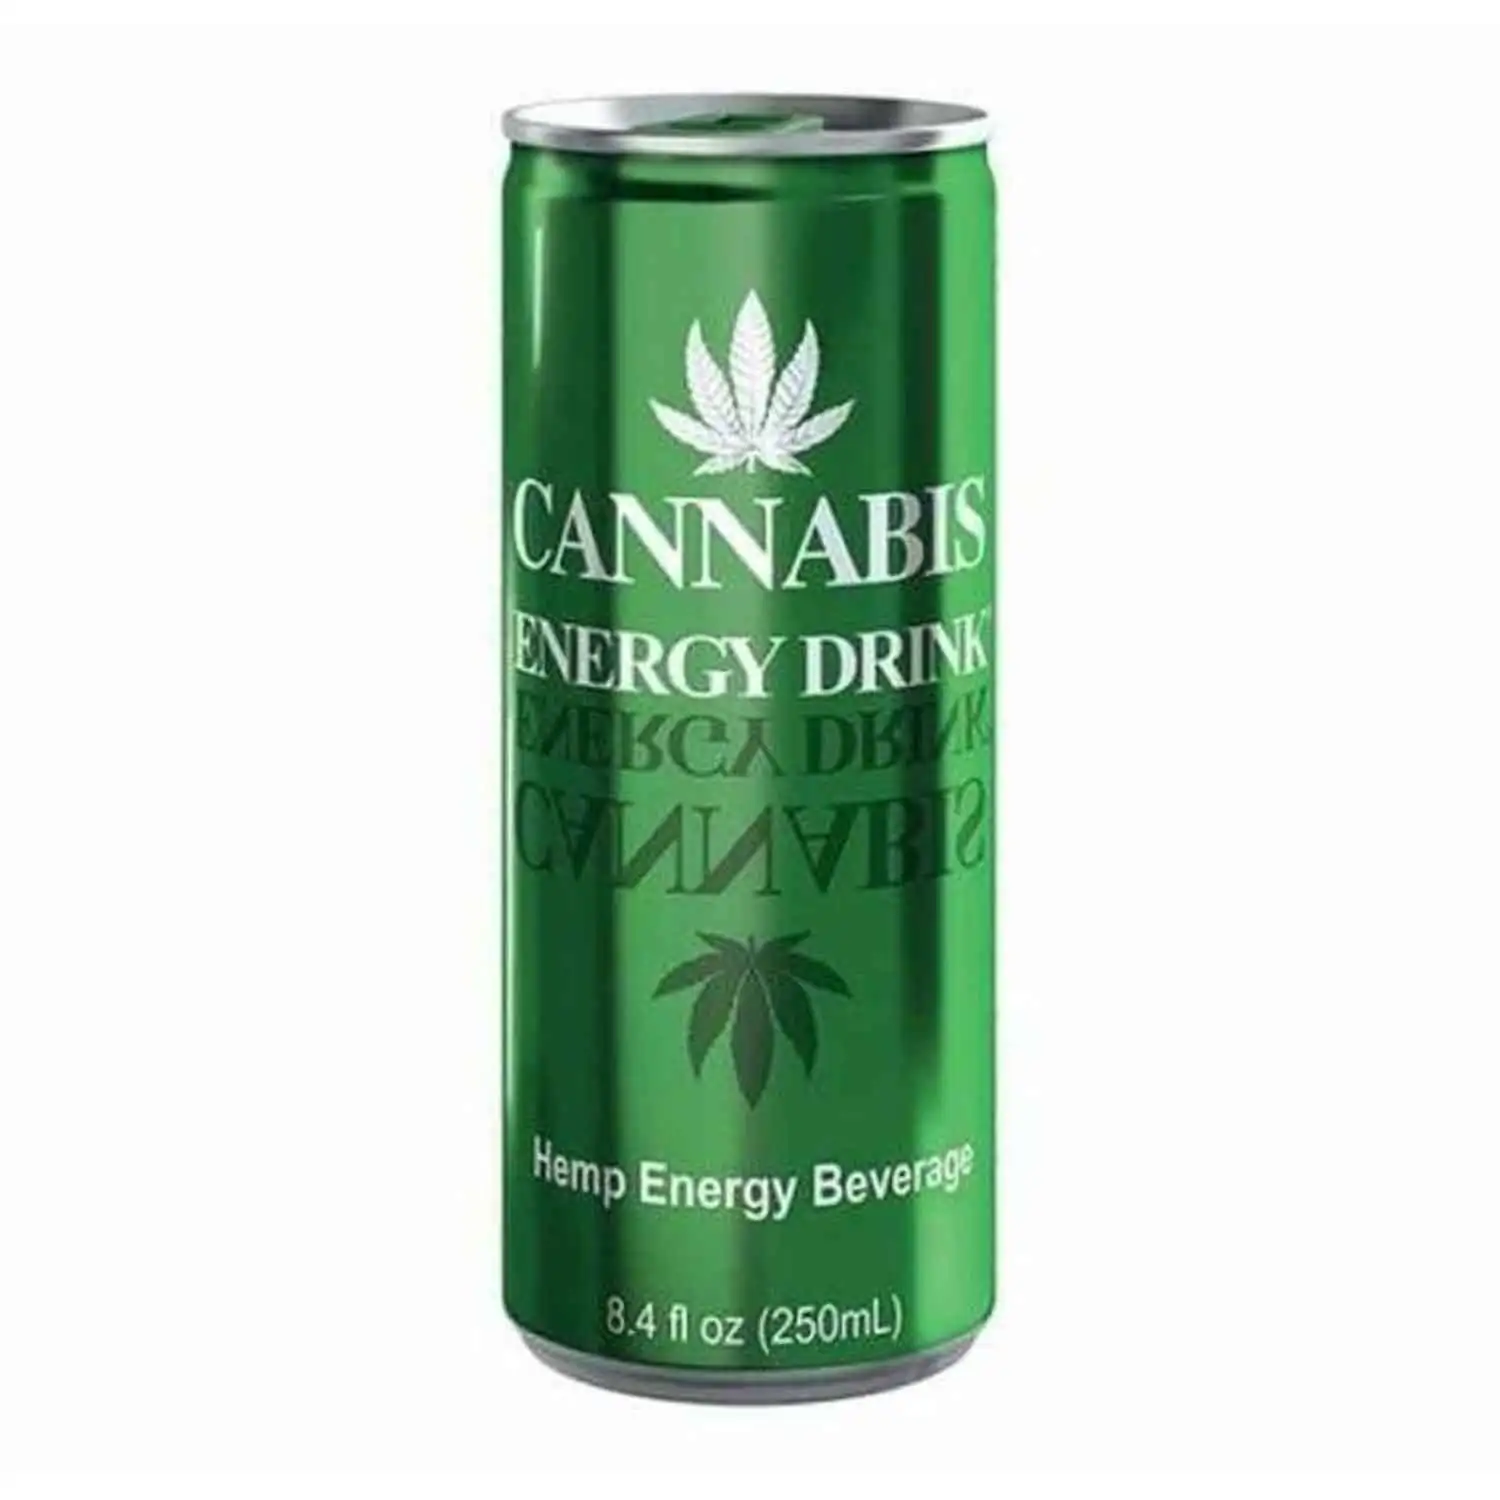 Cannabis energy drink regular 25cl - Buy at Real Tobacco